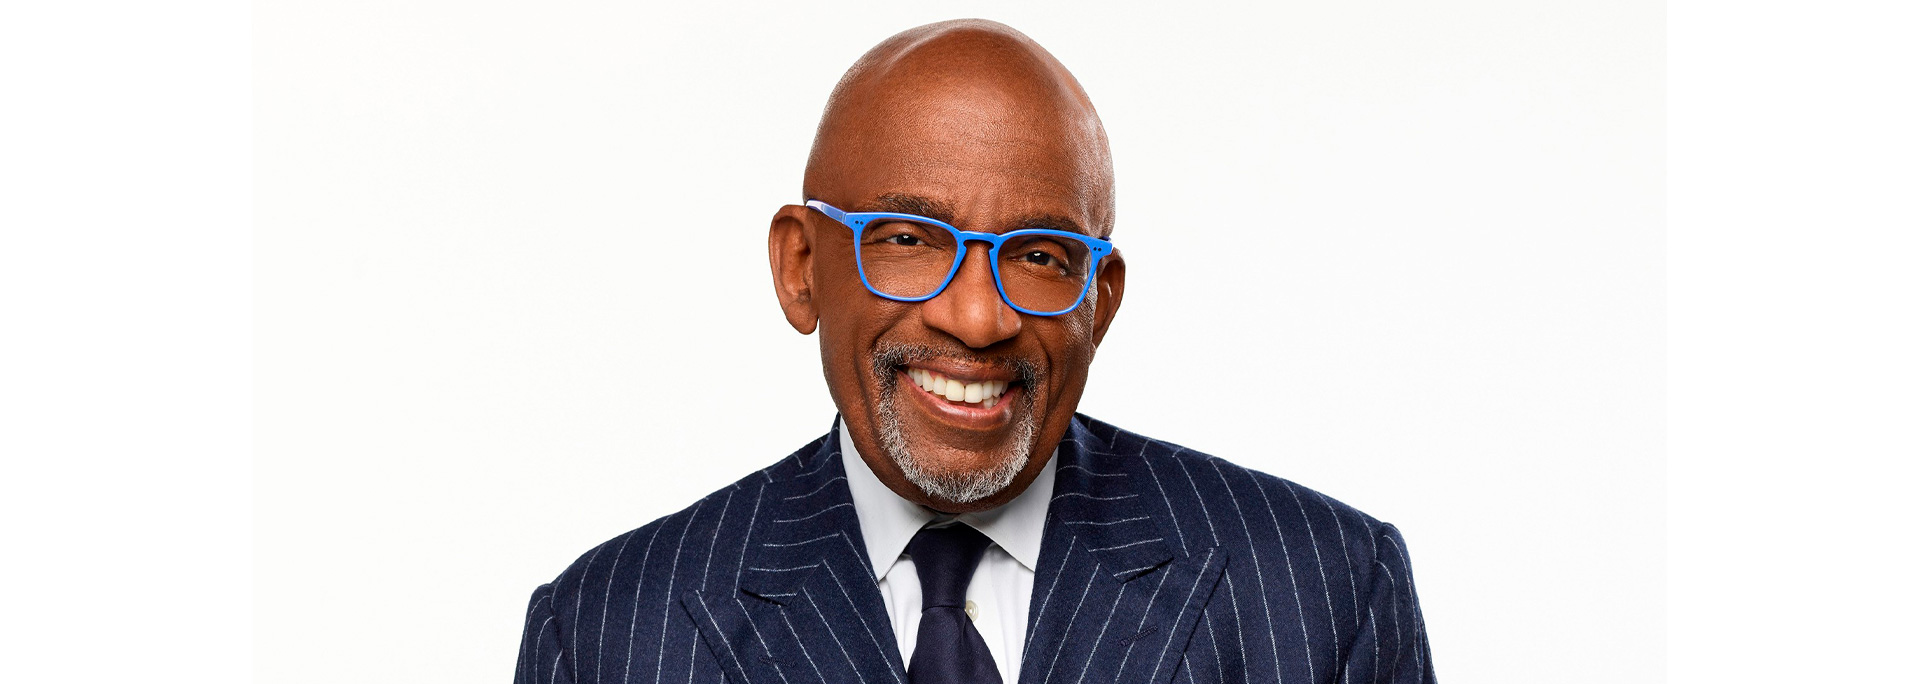 NBC NEWS’ TODAY weatherman, anchor Al Roker has been chosen as the recipient of the 38th annual Walter Cronkite Award for Excellence in Journalism.